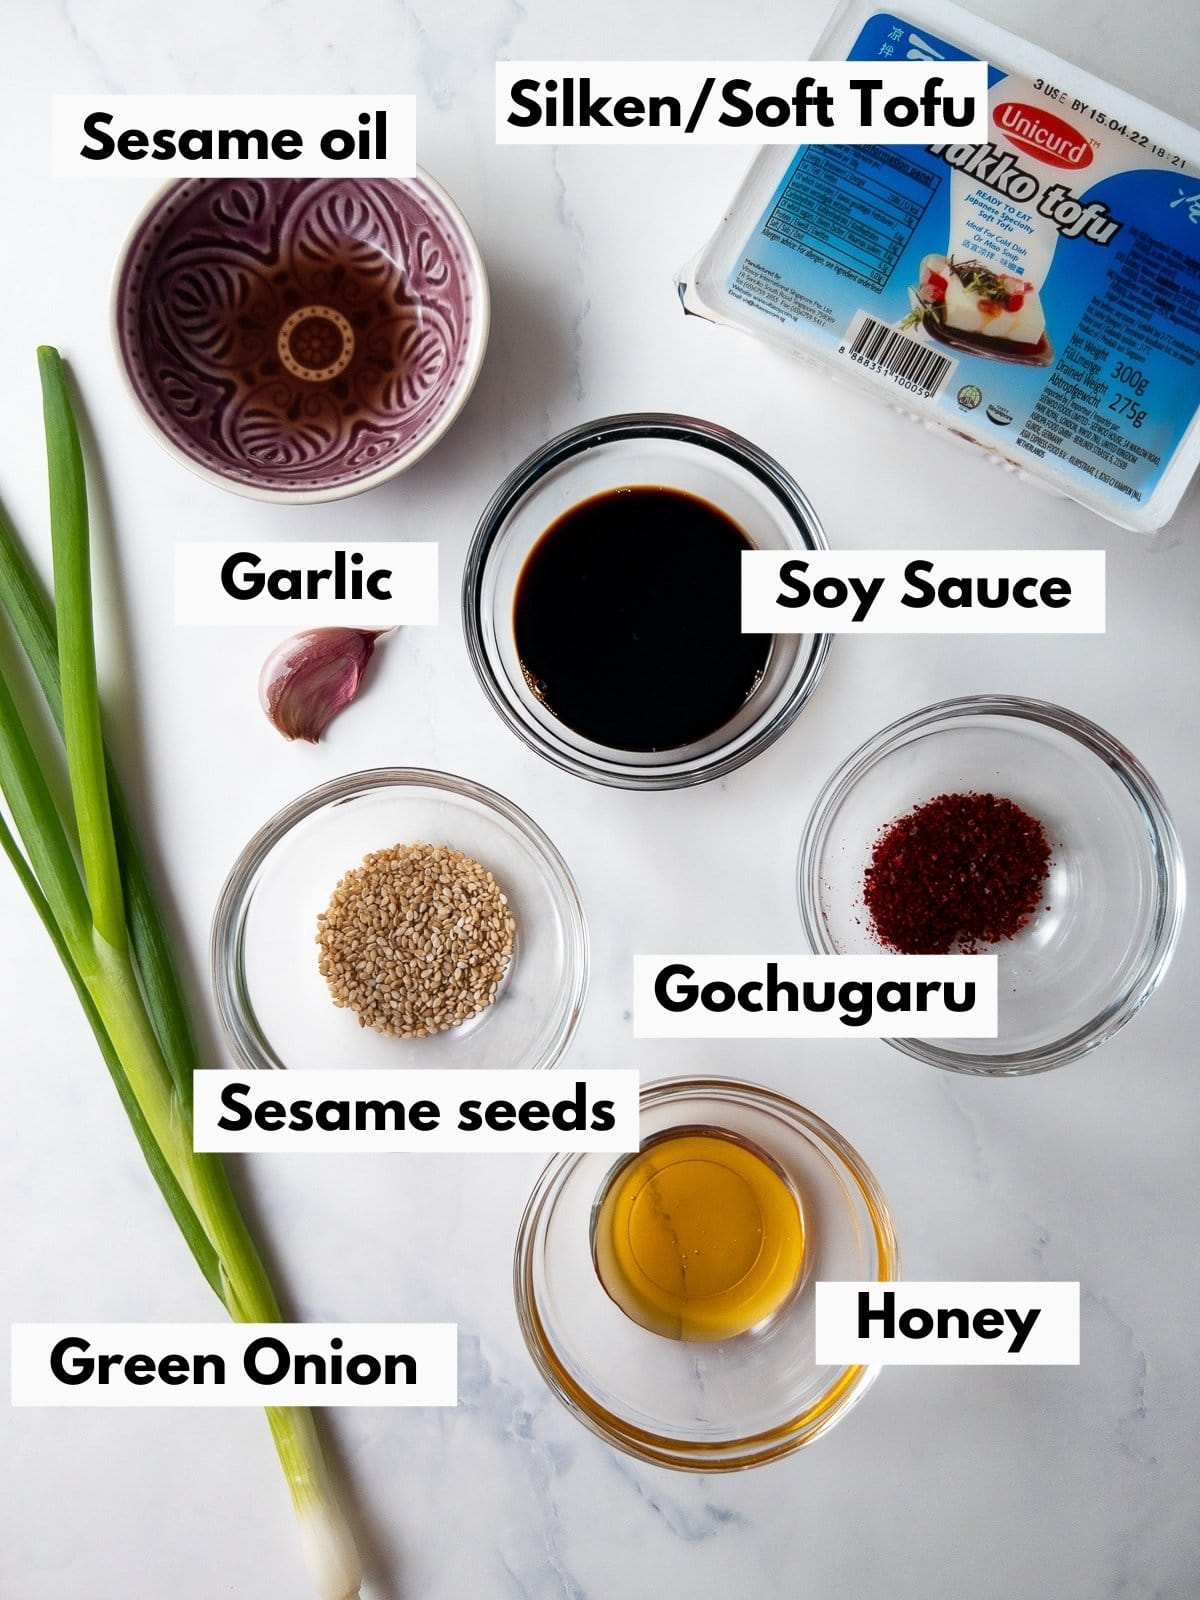 ingredients for silken tofu on a table